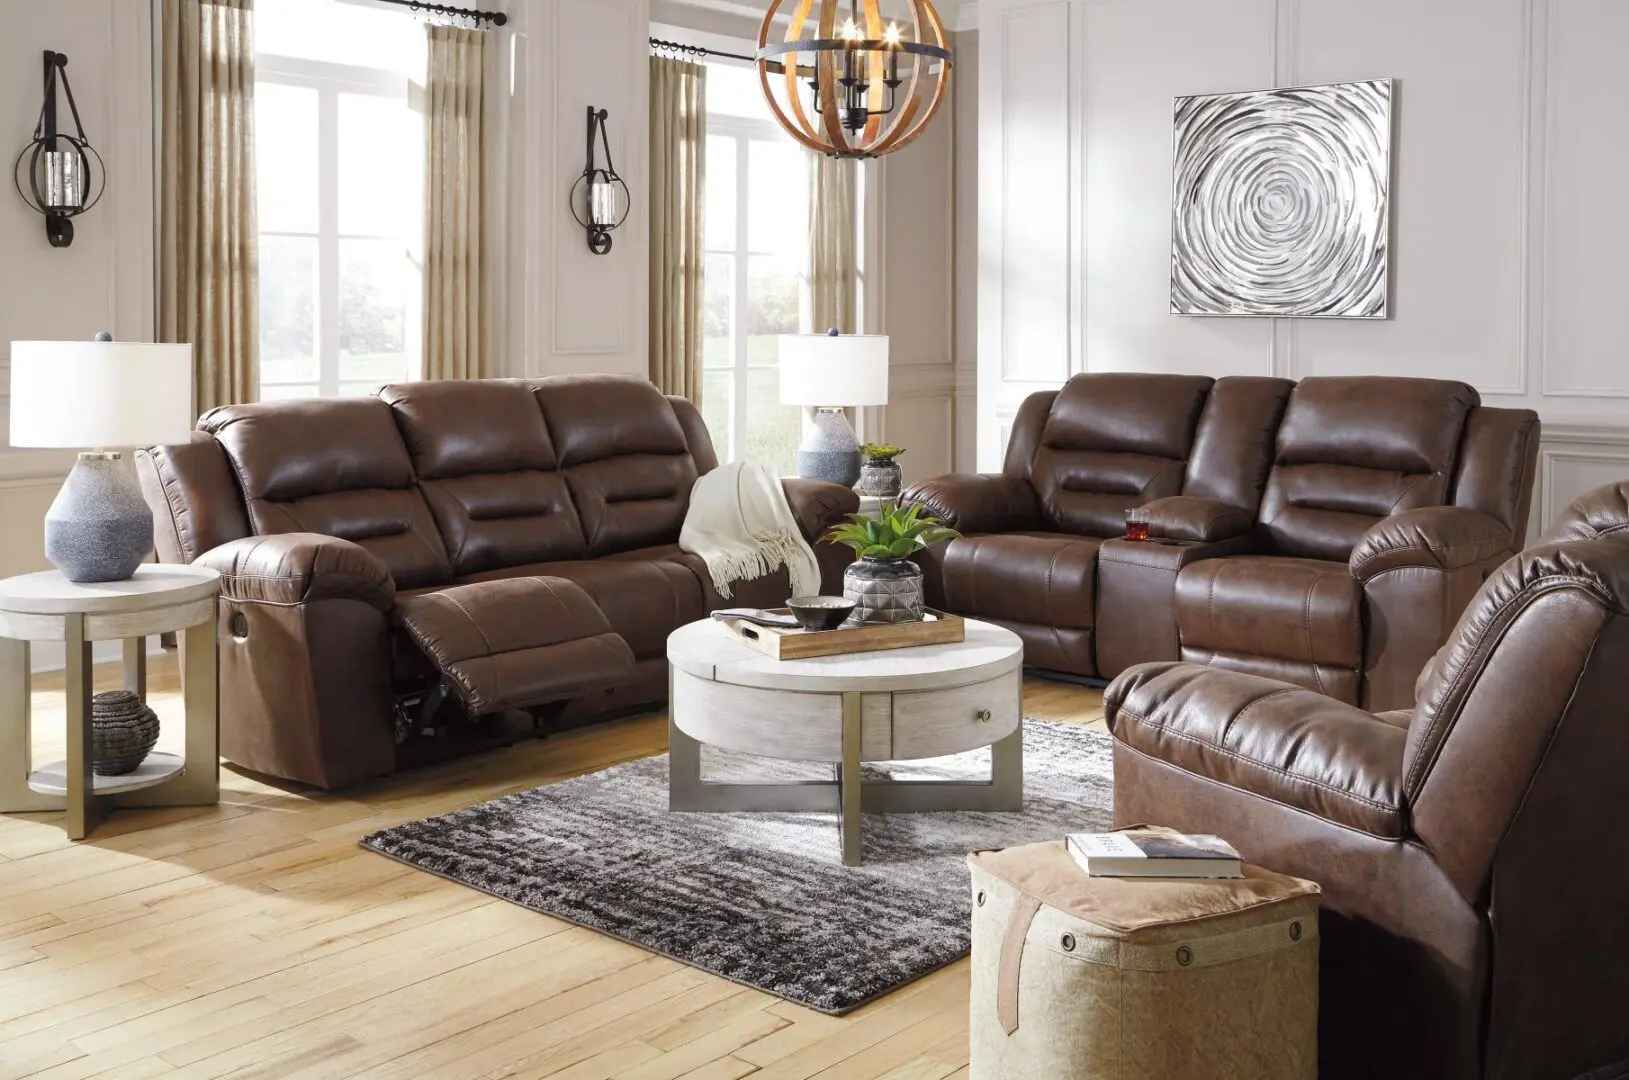 A living room with brown leather furniture and a white coffee table.